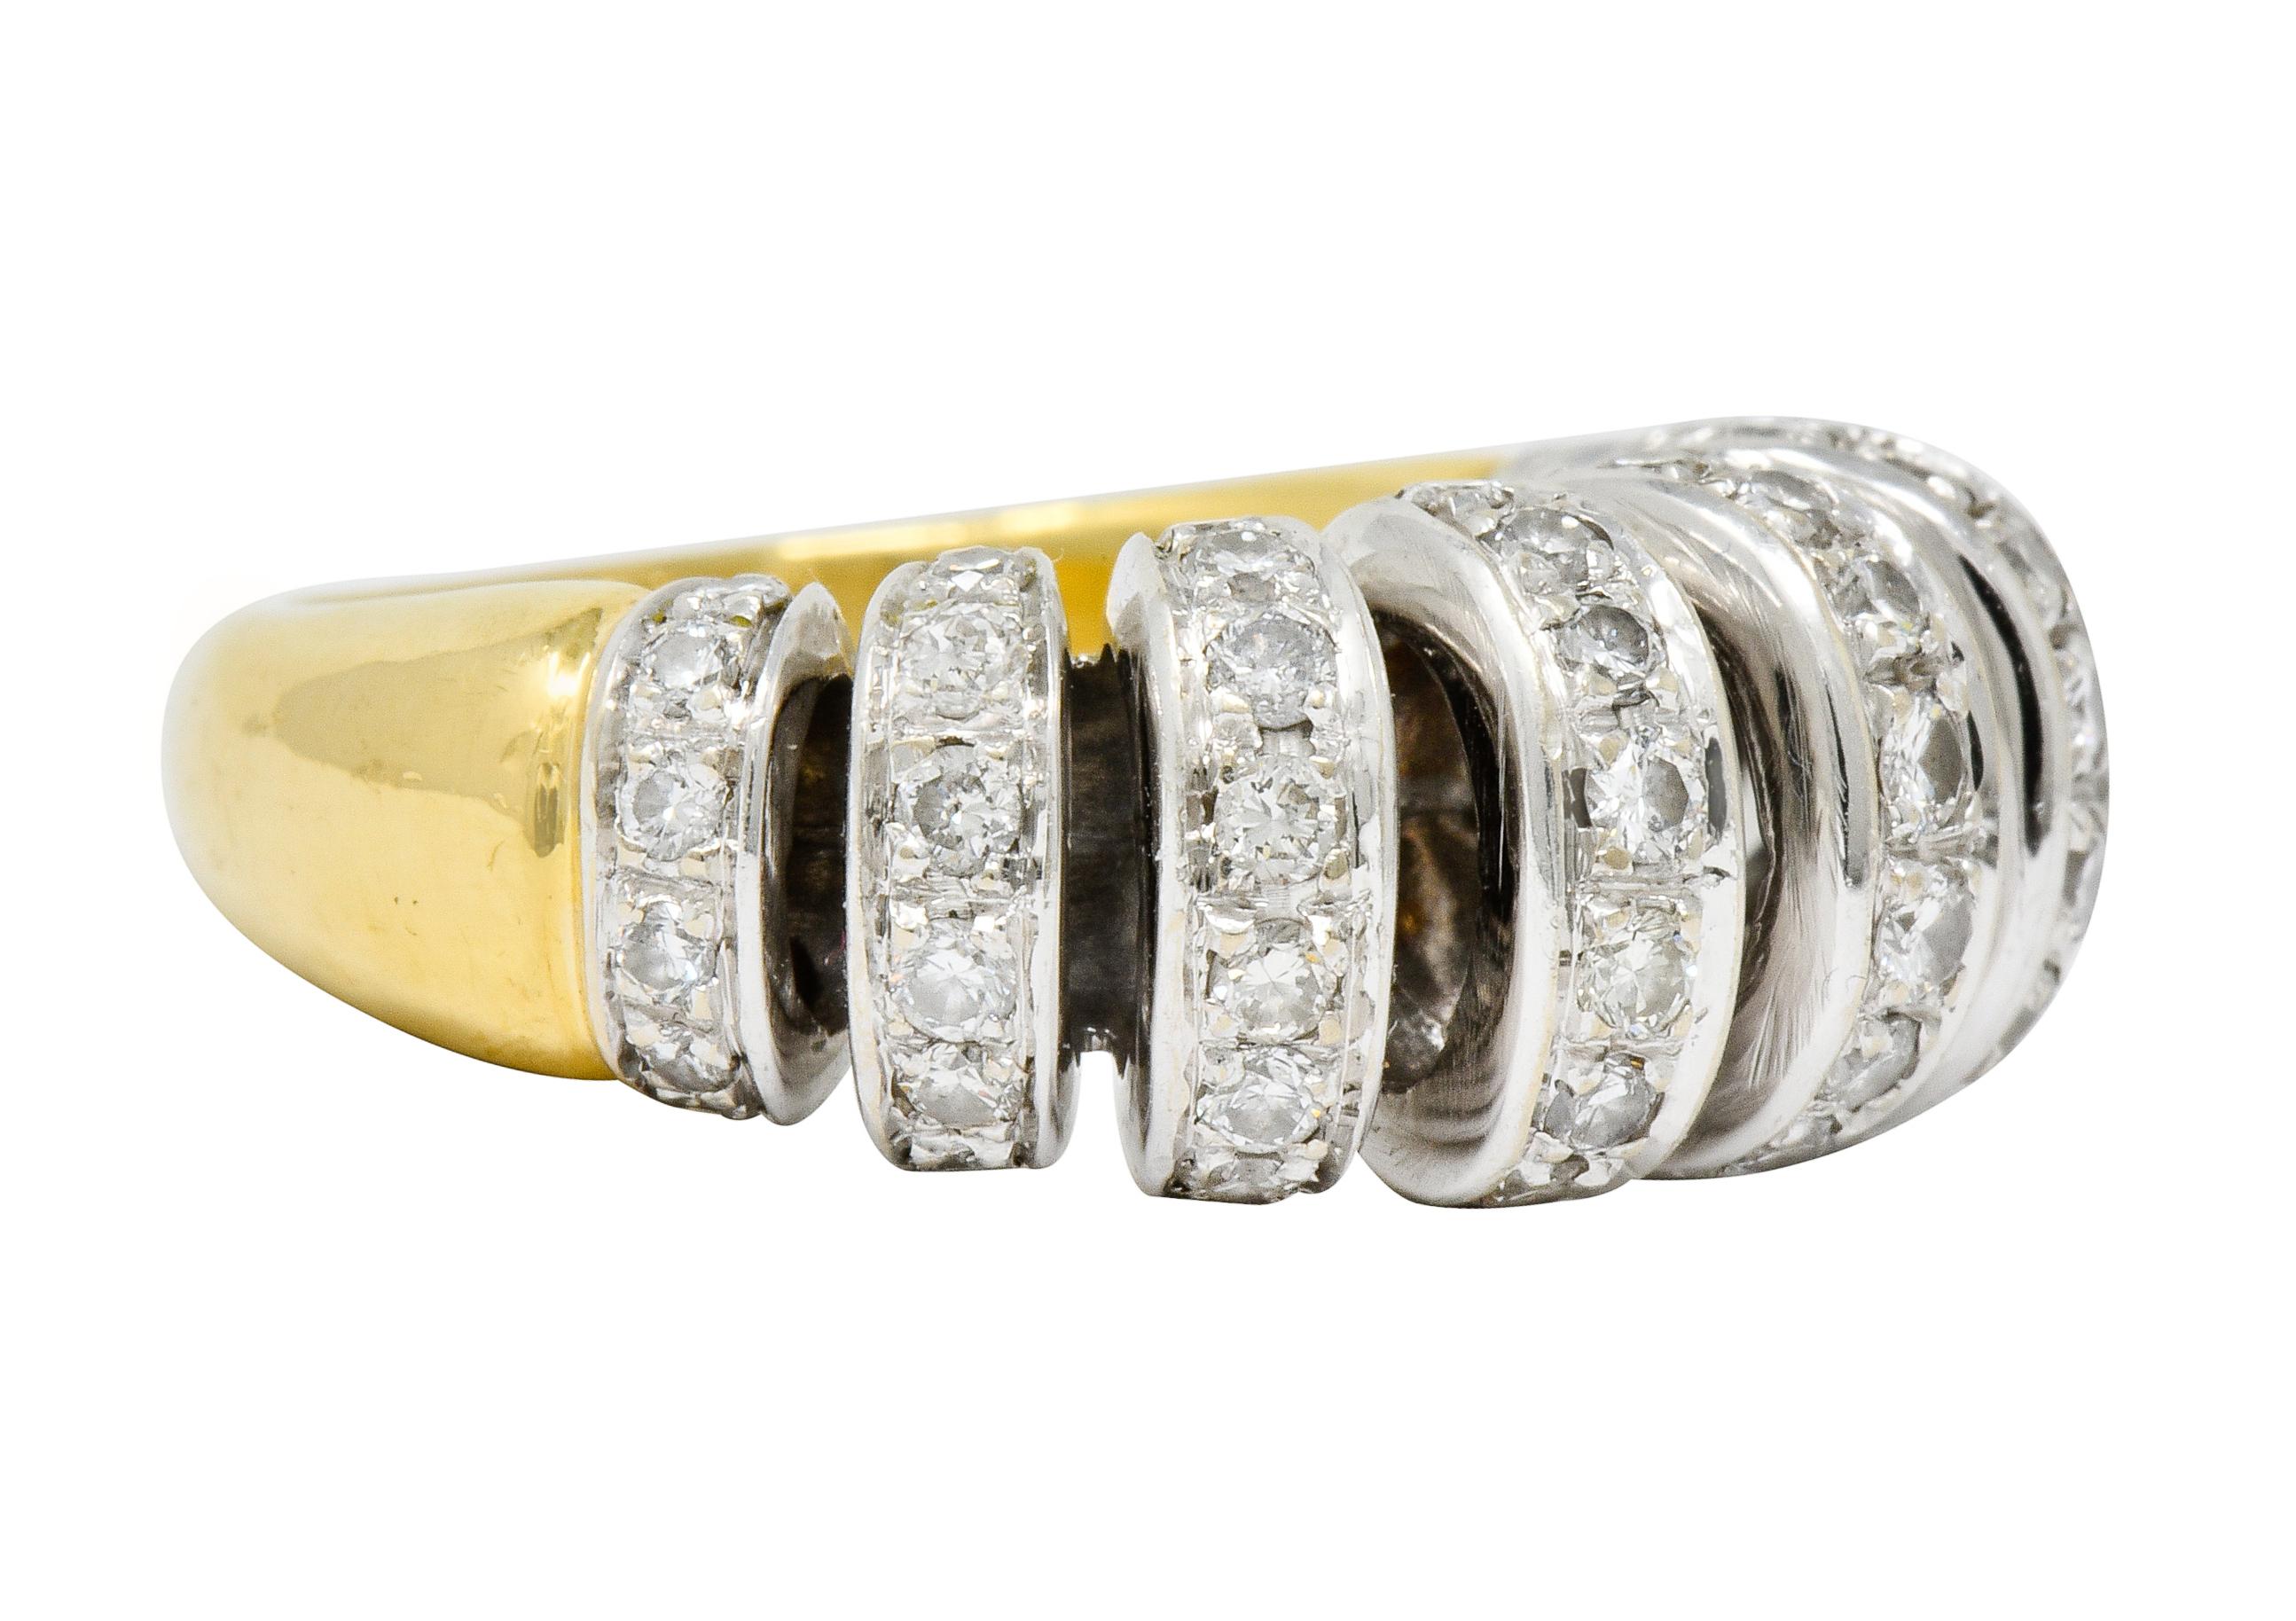 Ruched bombè style ring with a white gold top designed as airy segmented loops

Bead set throughout by round brilliant cut diamonds weighing in total approximately 1.72 carats, G to I color with VS clarity

Completed by a polished yellow gold